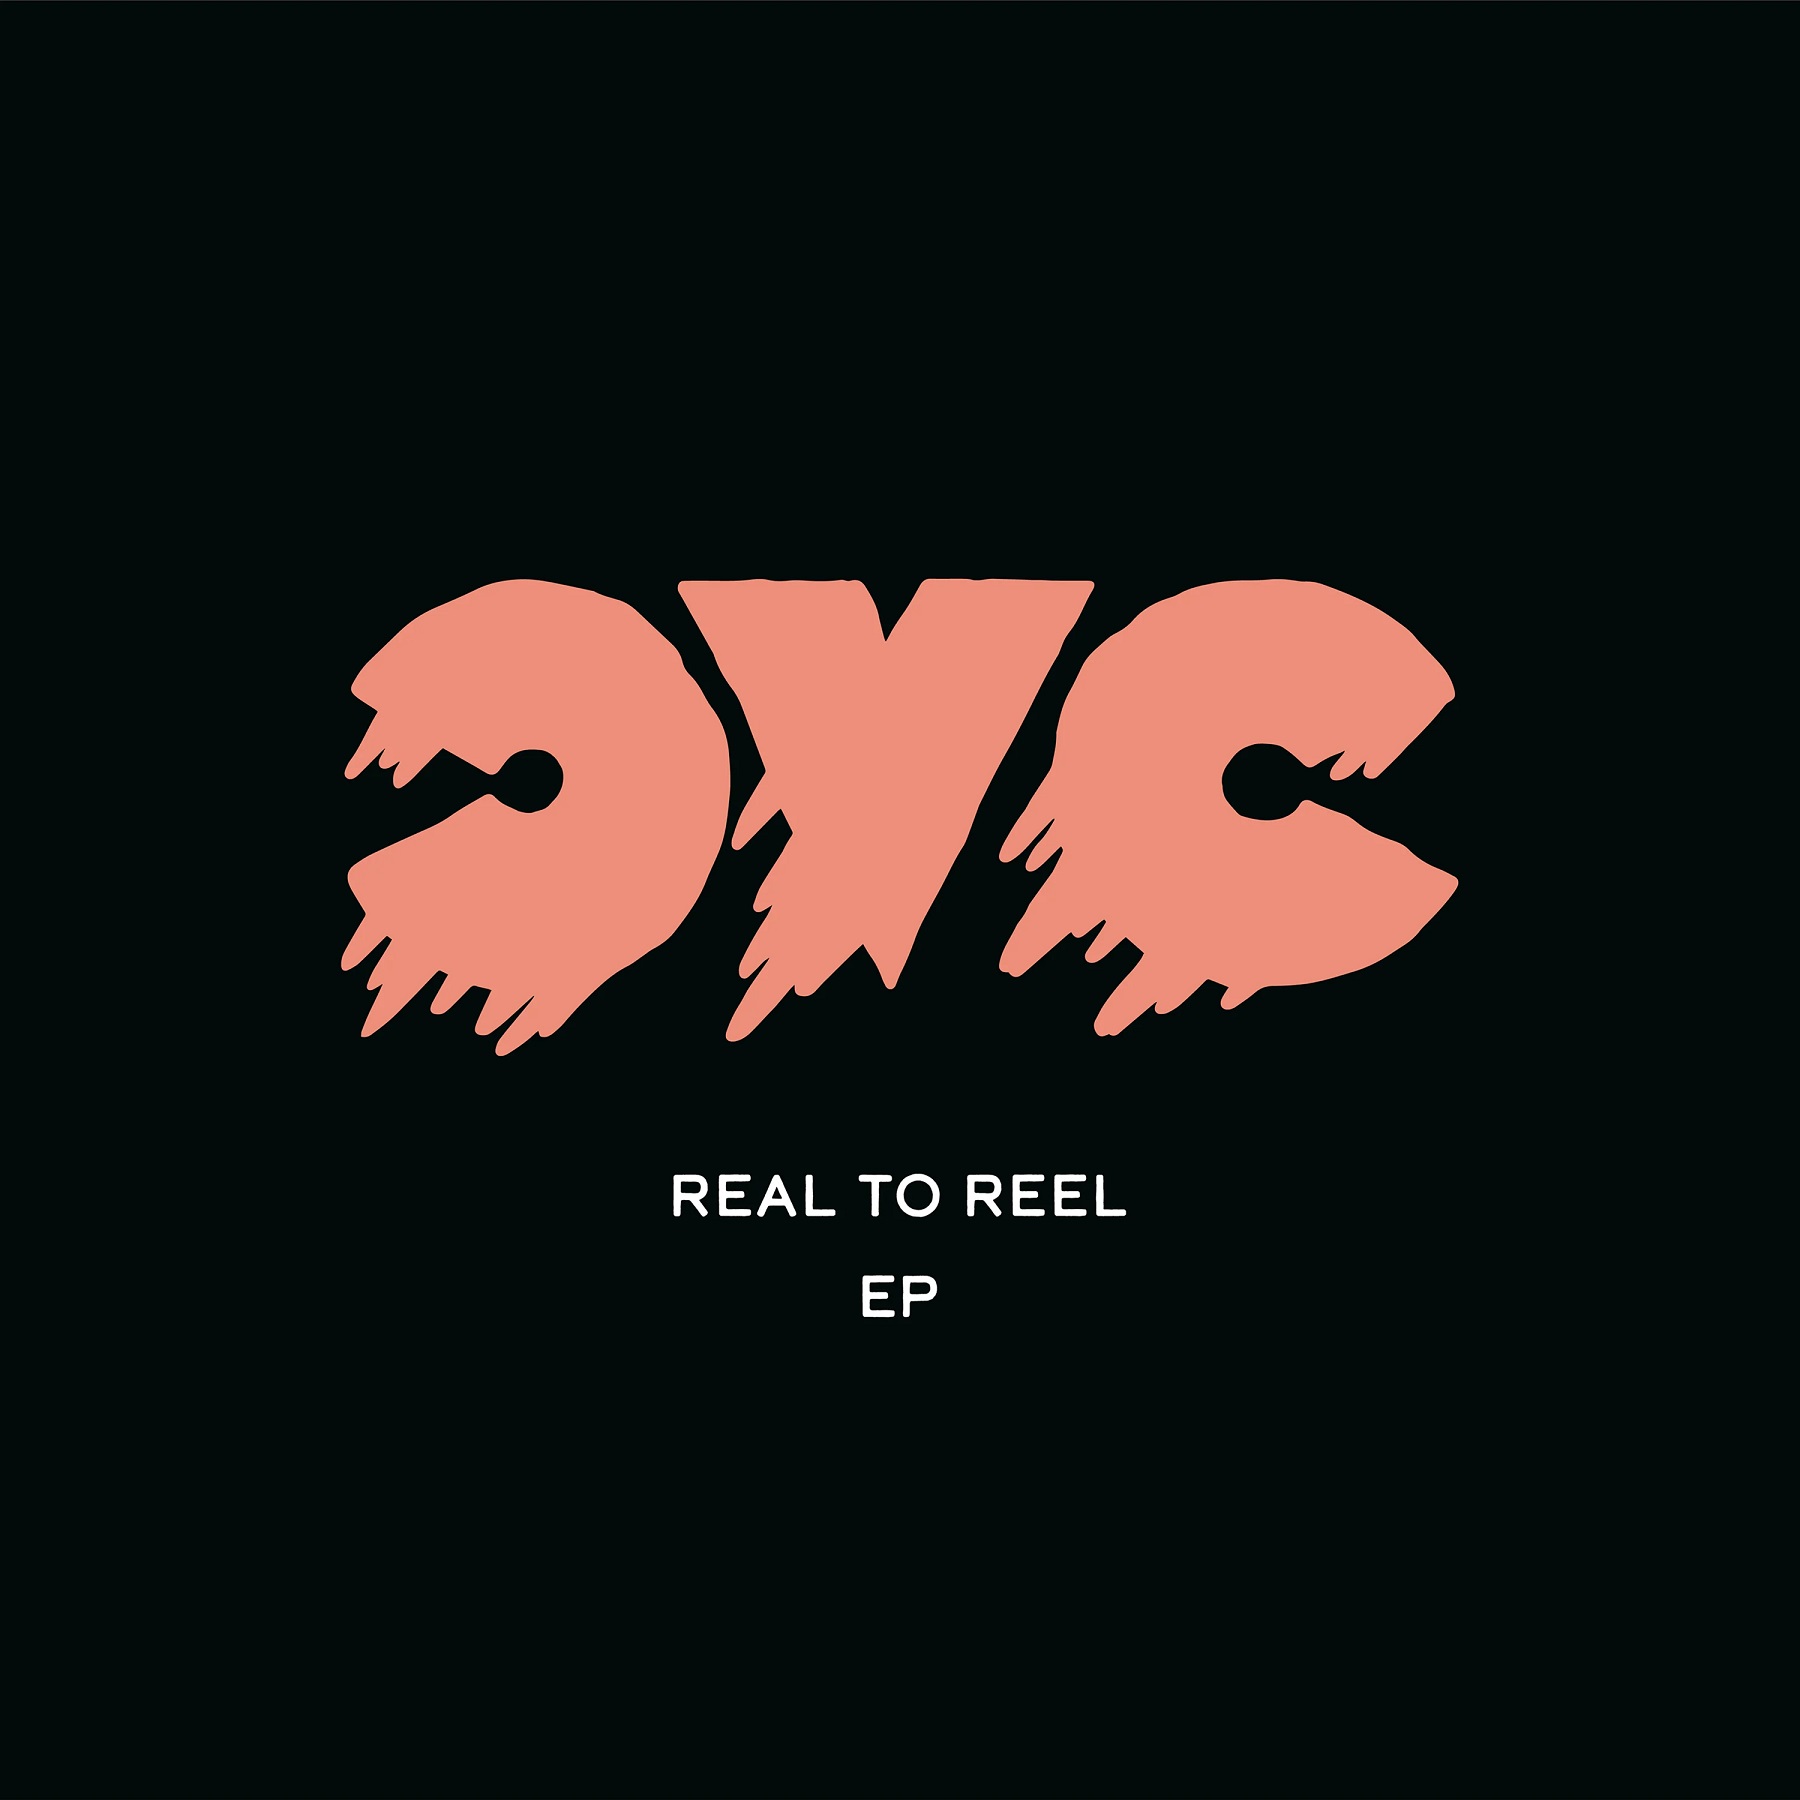 Real To Reel EP